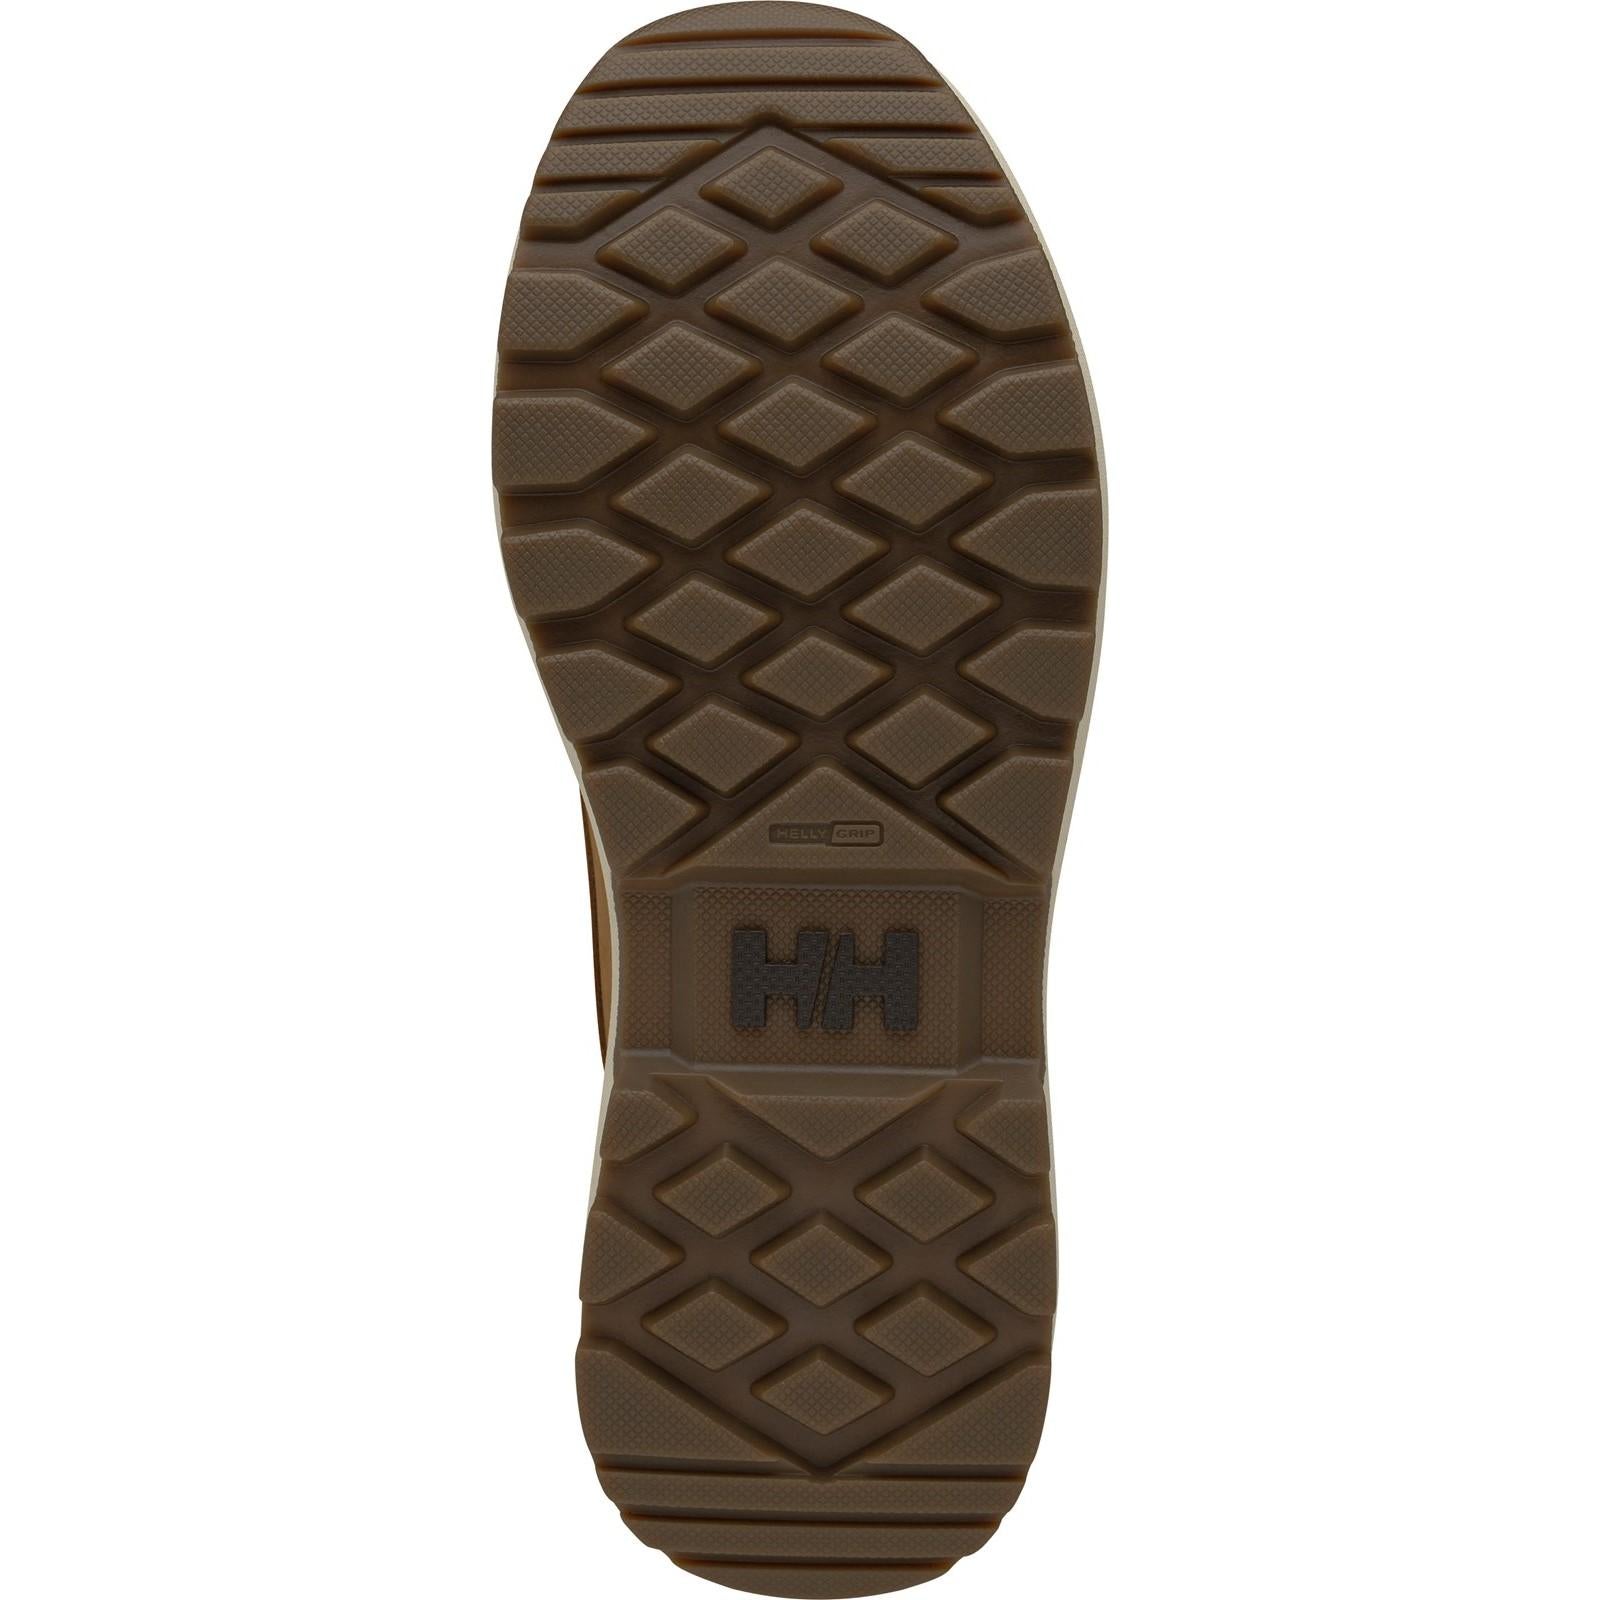 Helly Hansen Bowstring Boots